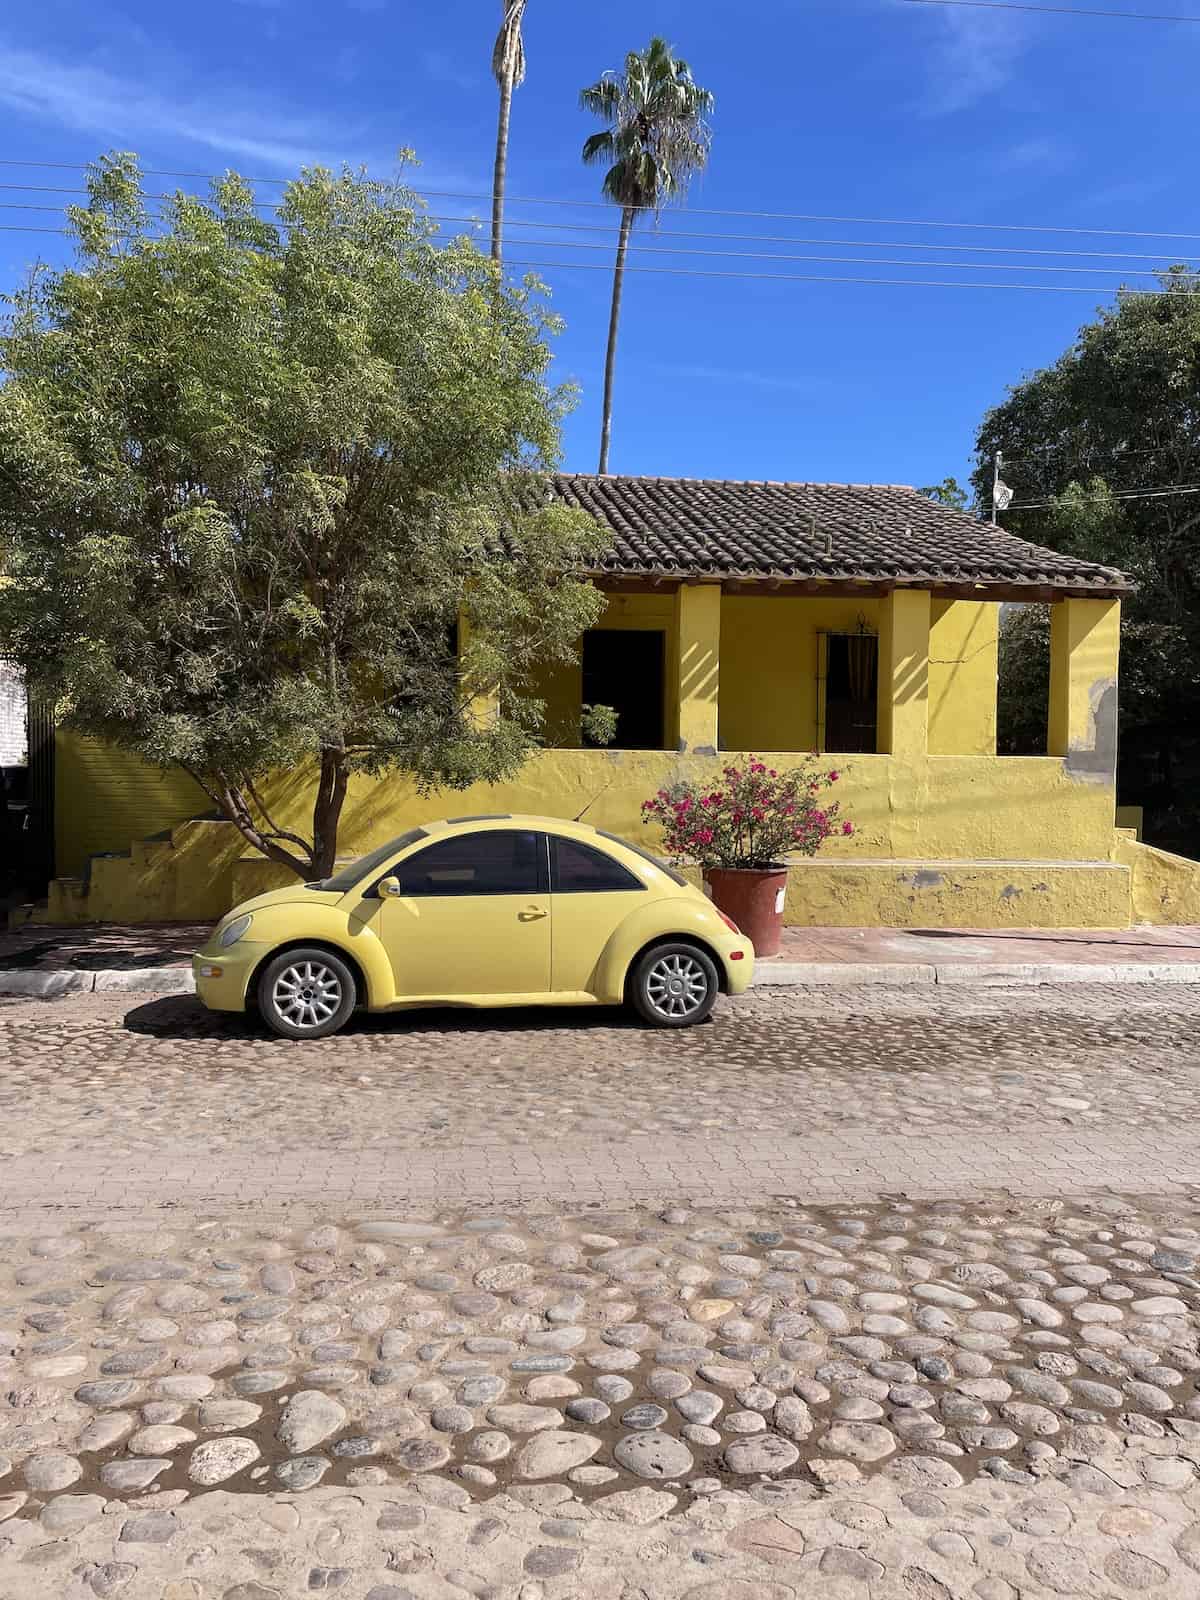 Yellow car in front of yellow house.